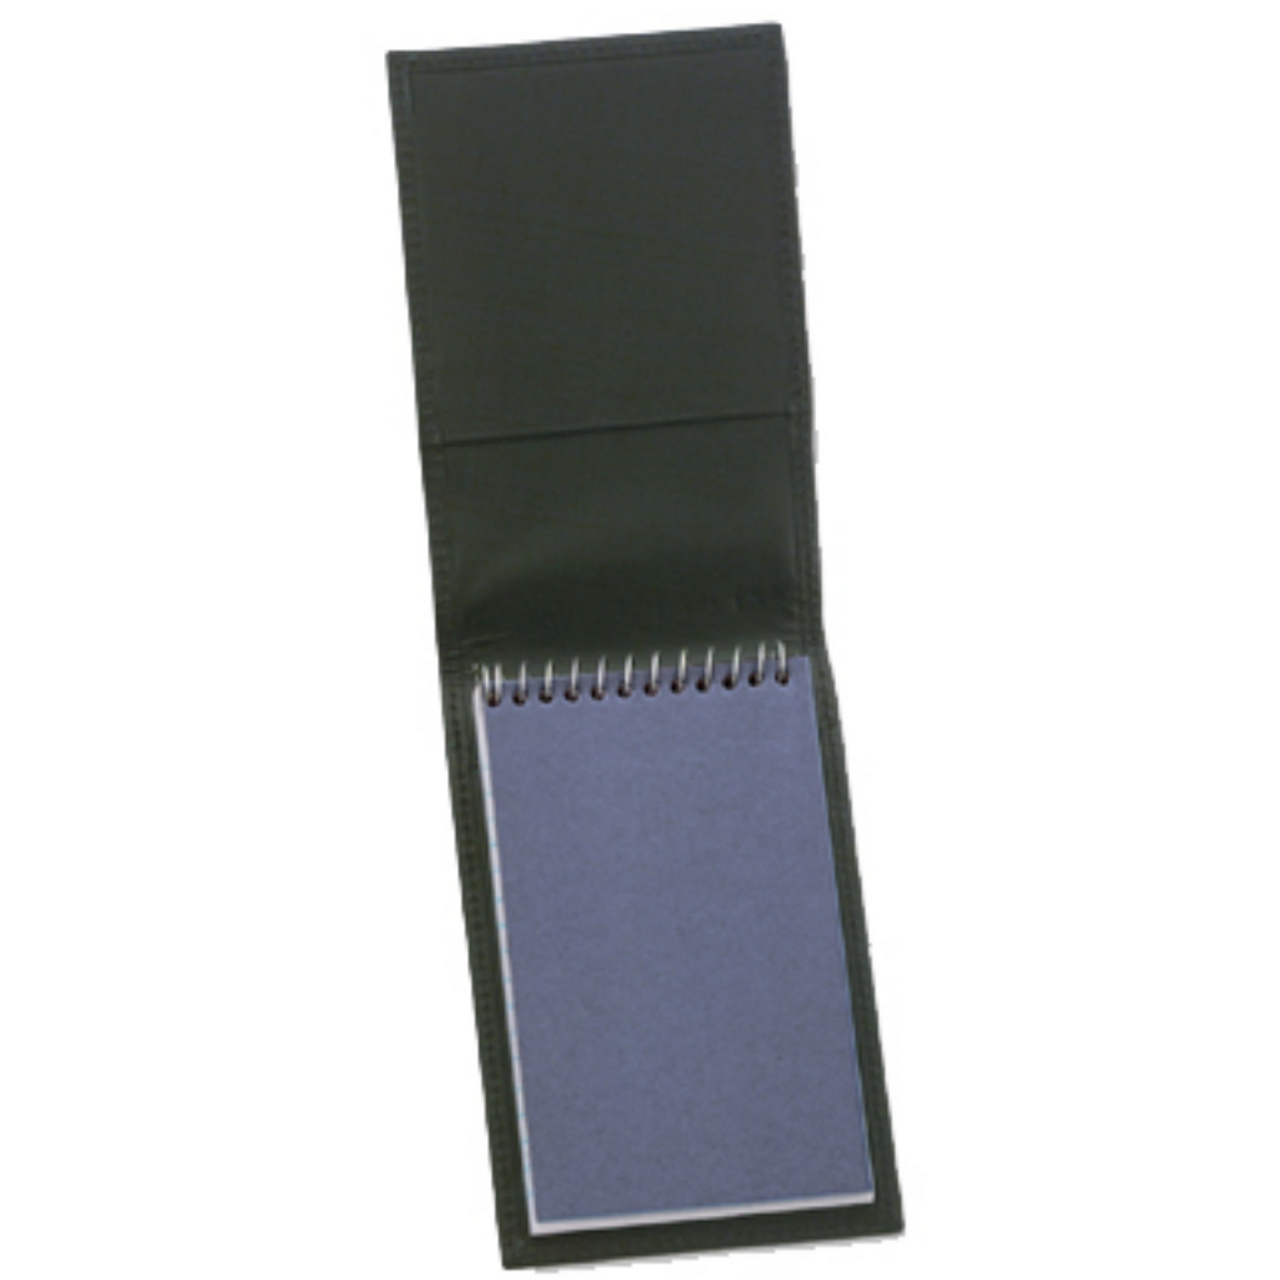 Top Open Notepad with Spiral Pad in Leather